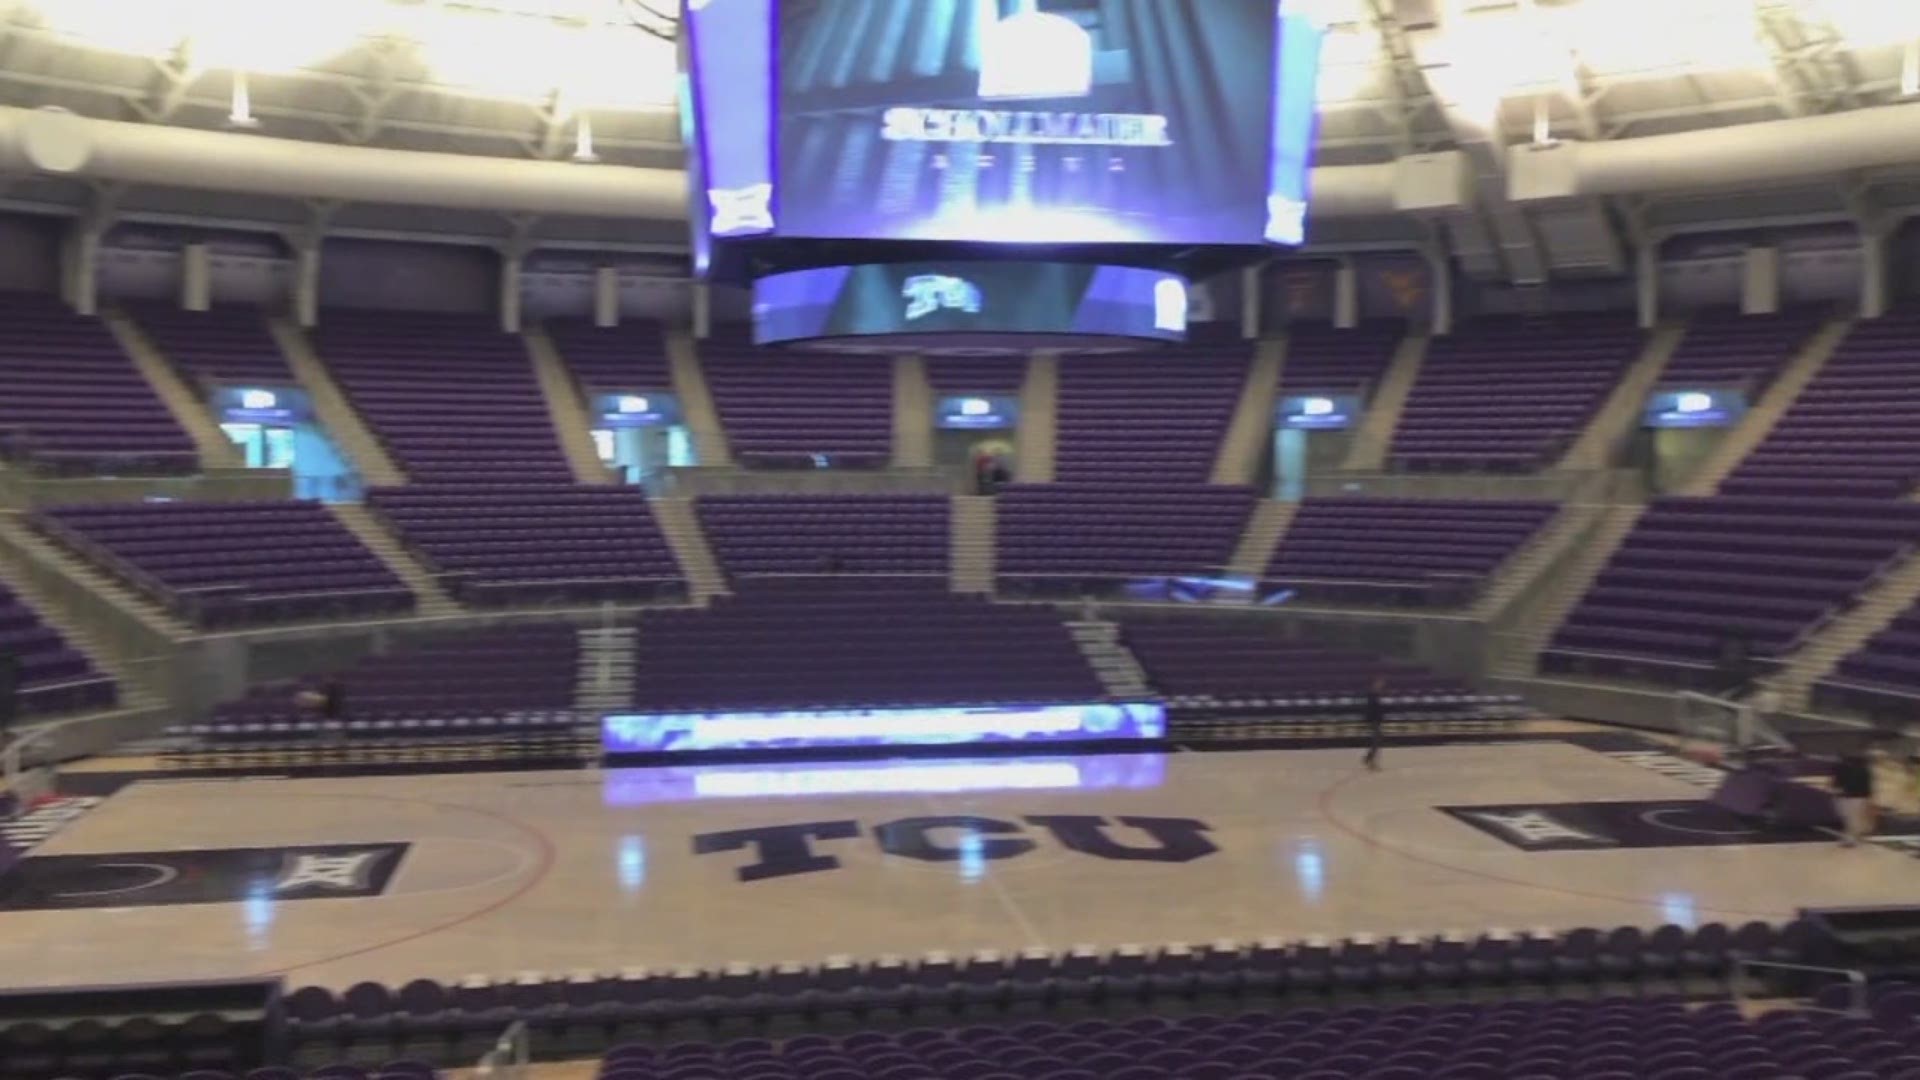 After a $72 million renovation inside and out, TCU boasts a state-of-the-art basketball facility in Schollmaier Arena. Landon Haaf gives you a tour.